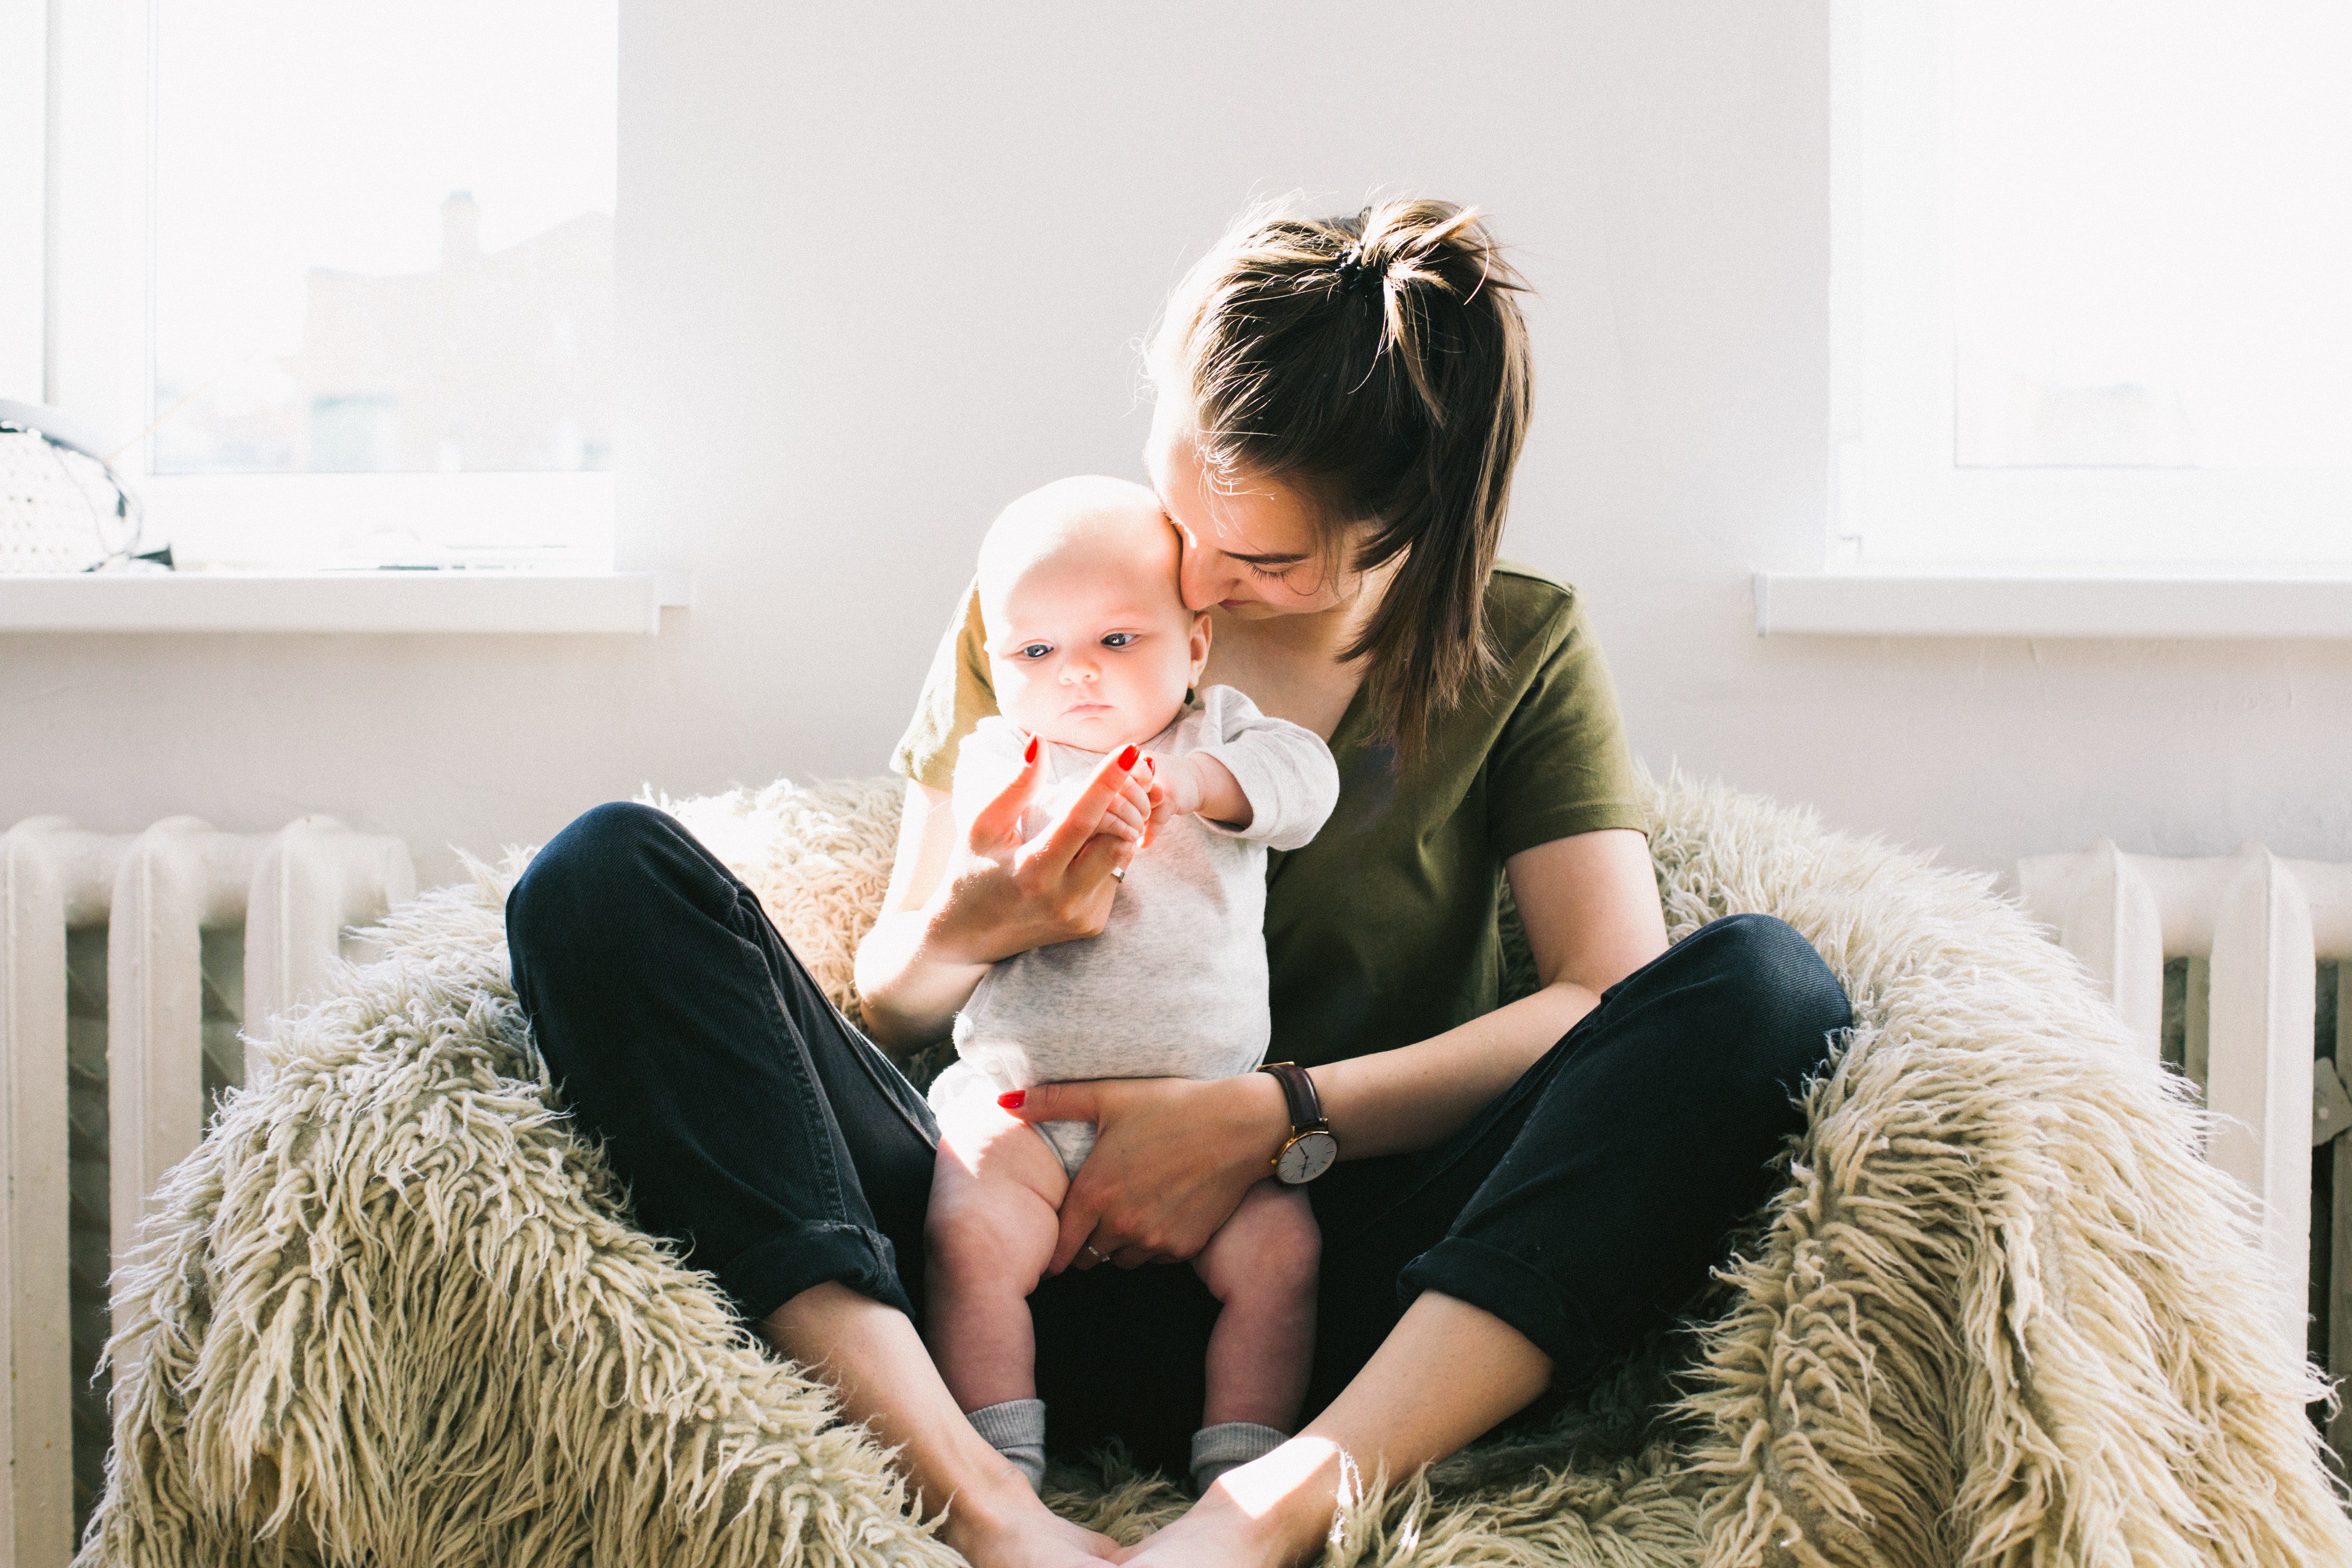 Regaining strength with postpartum physical therapy